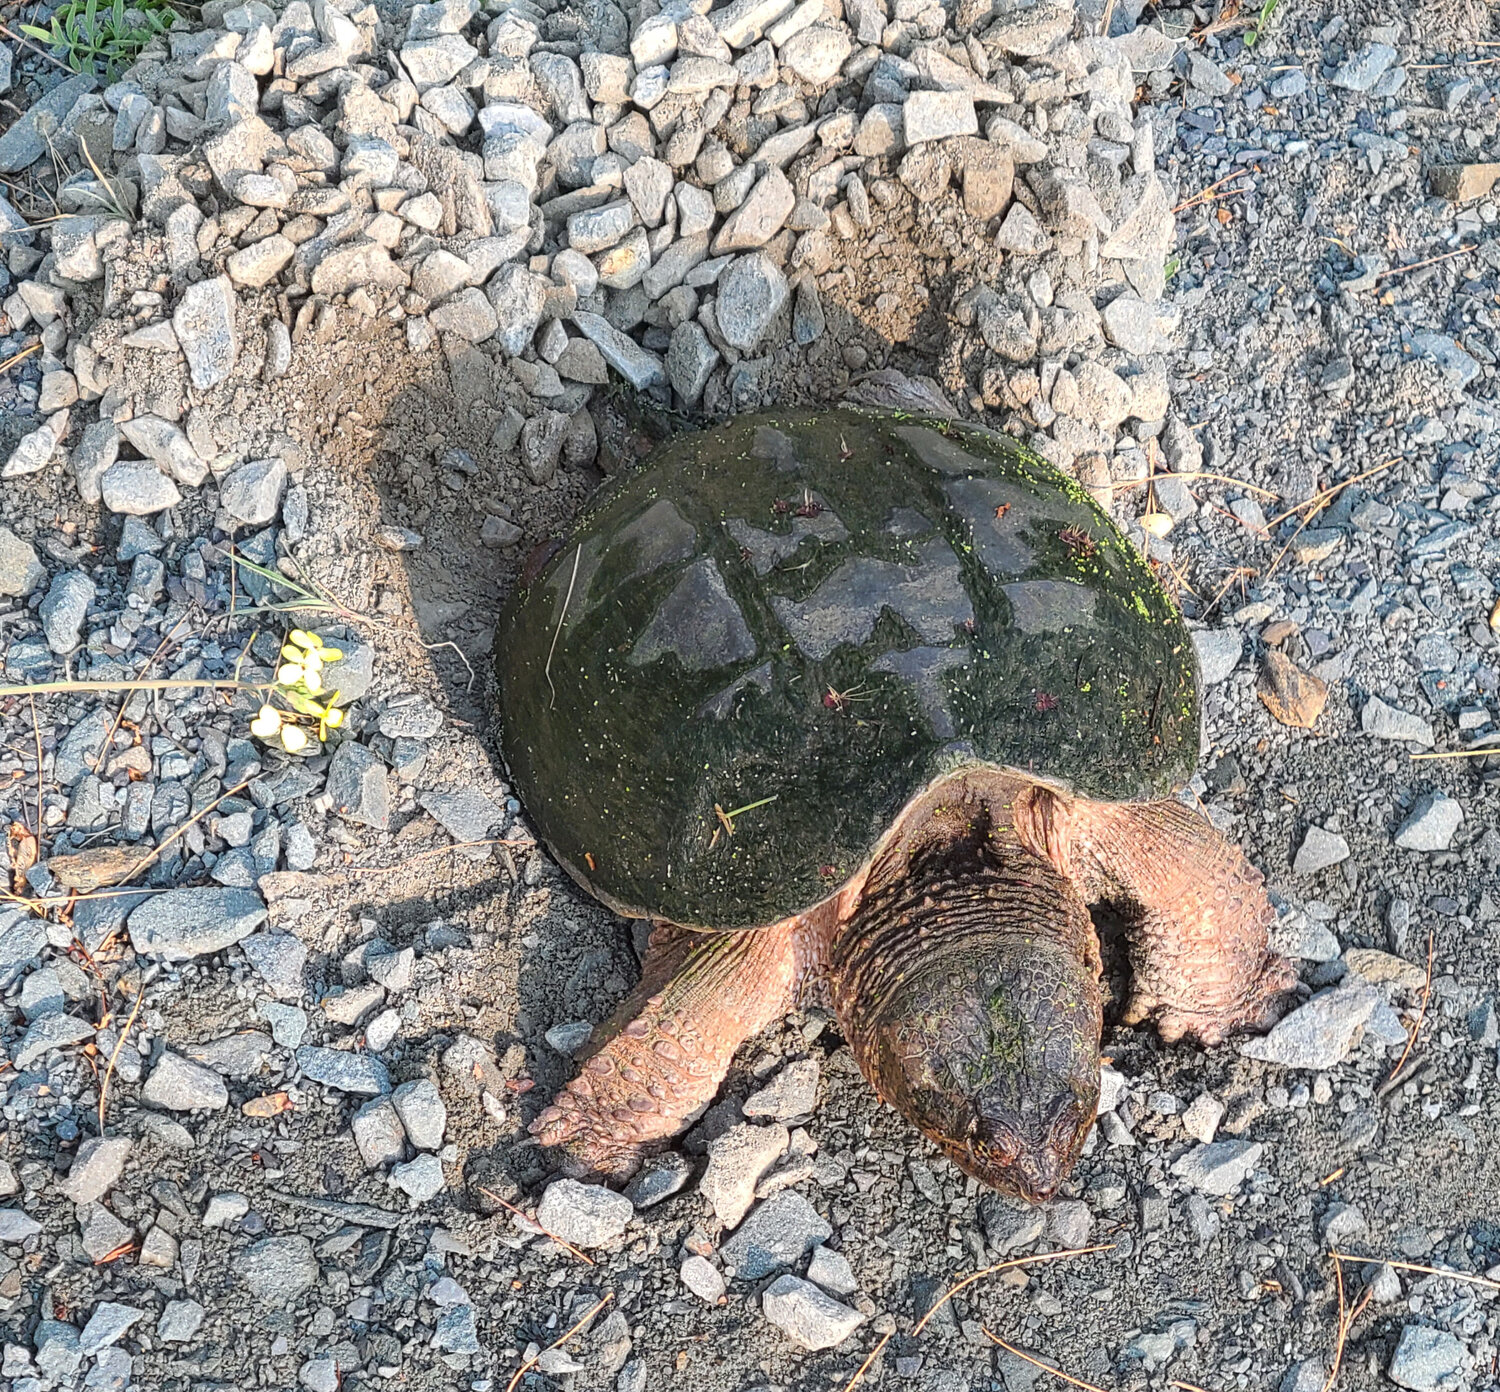 This female snapping turtle is in the midst of excavating as she prepares her nest. The shale aggregate of the road shoulder is frequently rolled to compress the stone, making it more durable. It looks like the stone is not stopping her excavation efforts. The hind legs are always used for nest excavation.